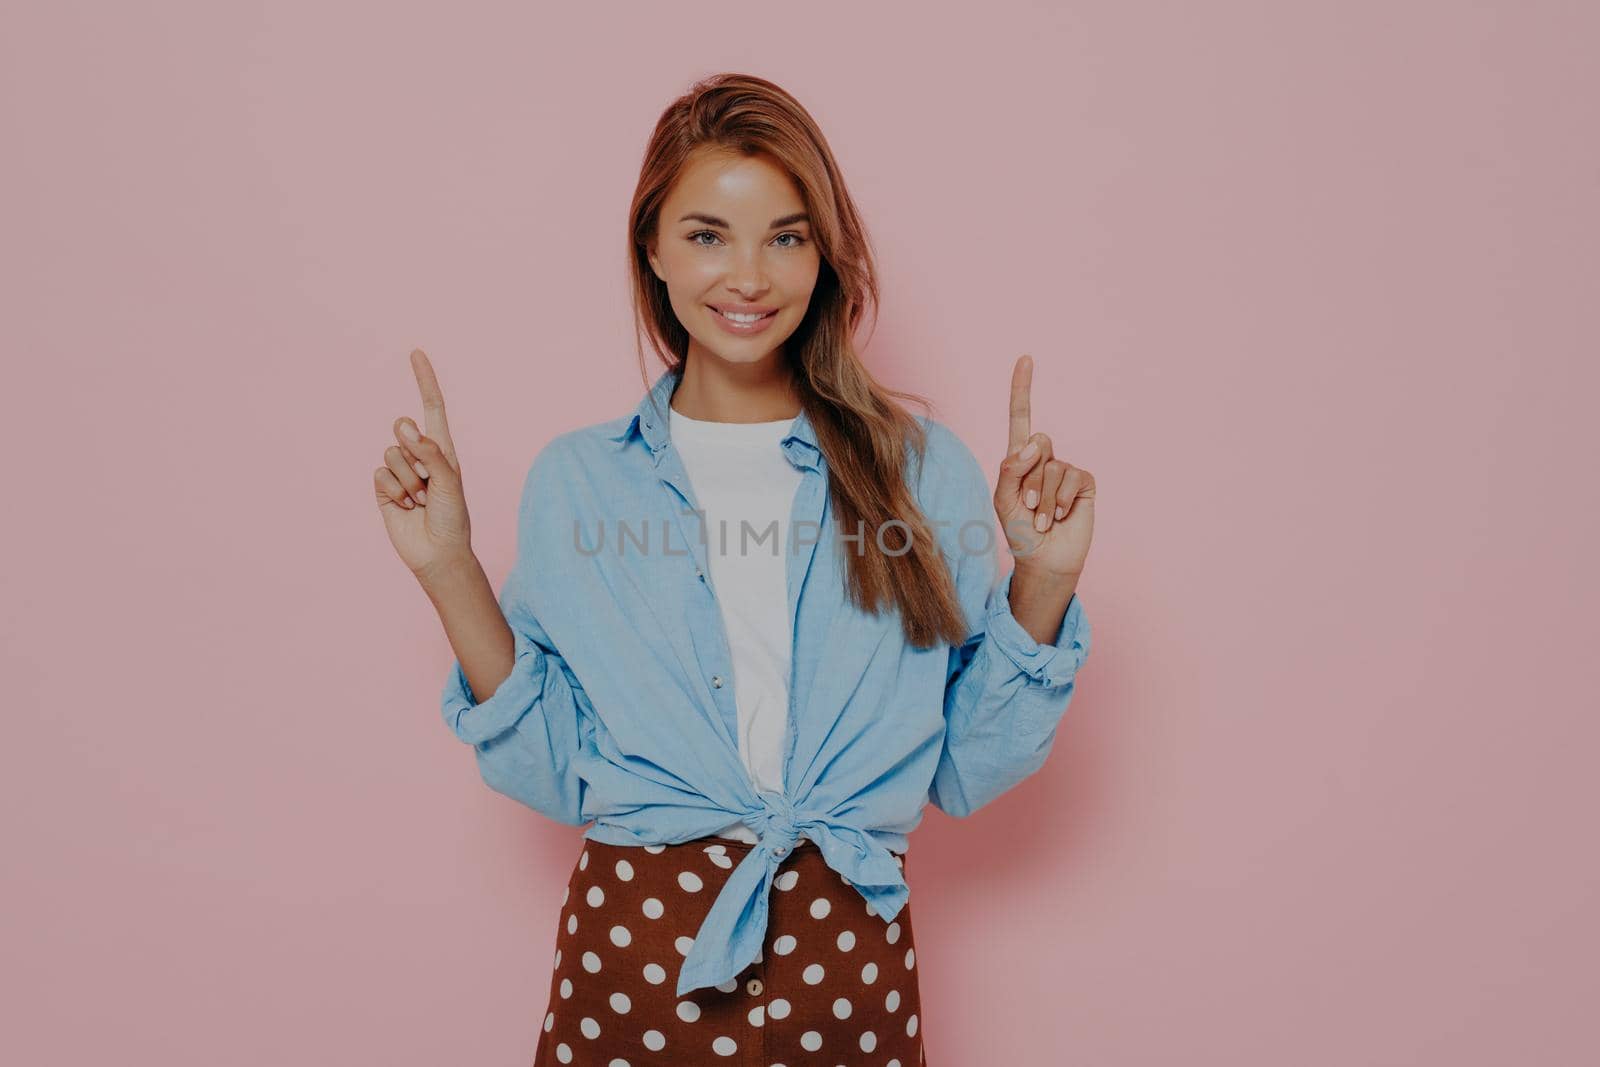 Young beautiful european woman with long stright hair wearing blue casual shirt and brown skirt with white polka dots, confidently pointing up with index fingers and smiling at camera